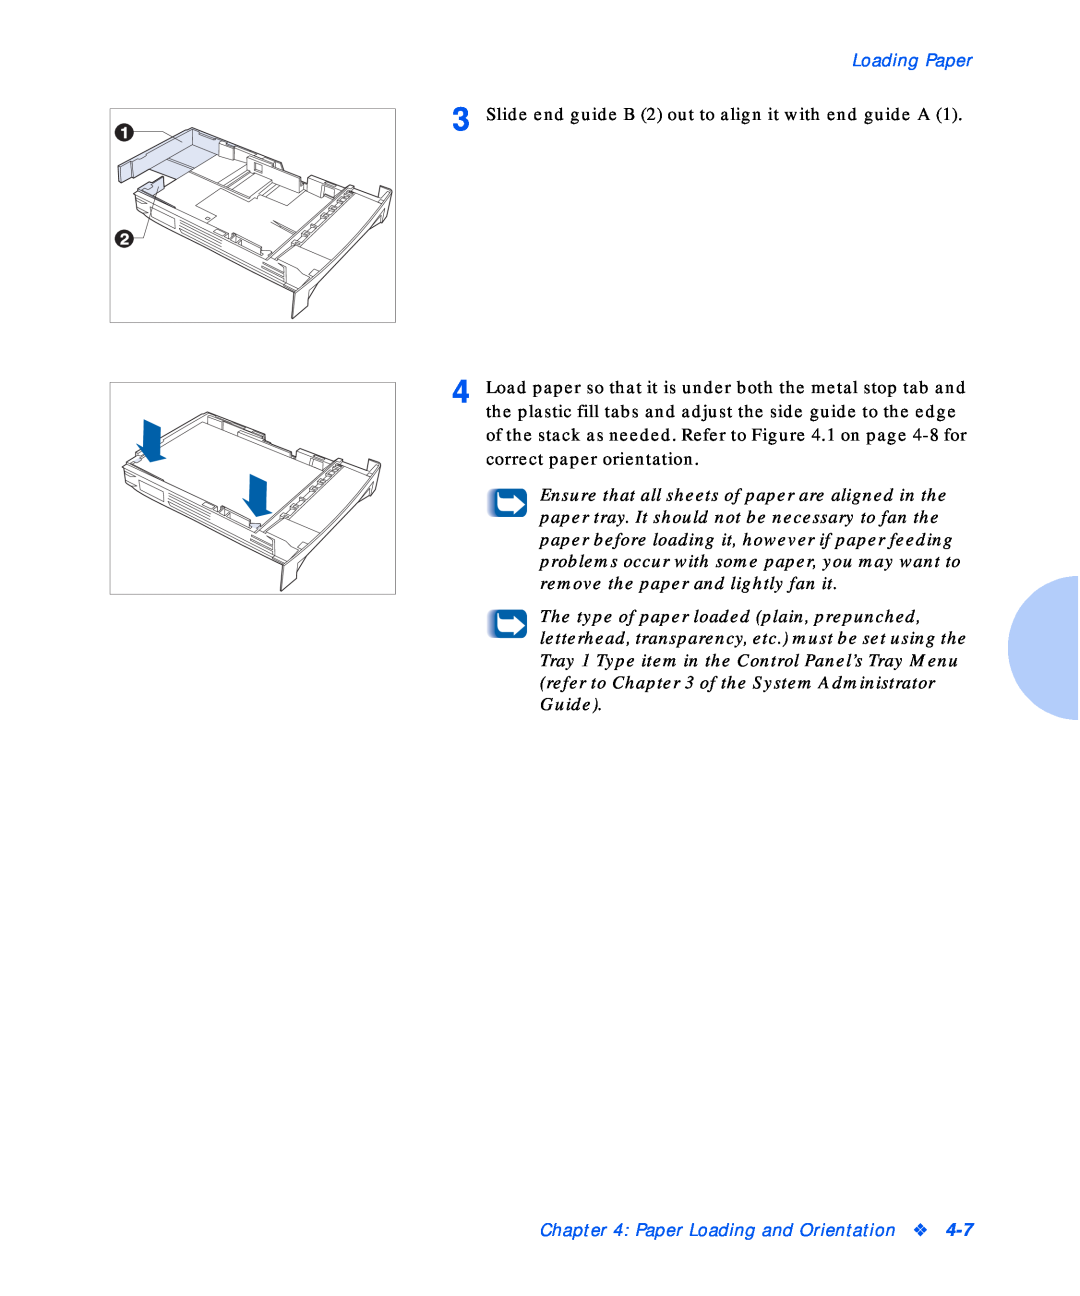 Xerox N17b manual Loading Paper, Slide end guide B 2 out to align it with end guide A, Paper Loading and Orientation 